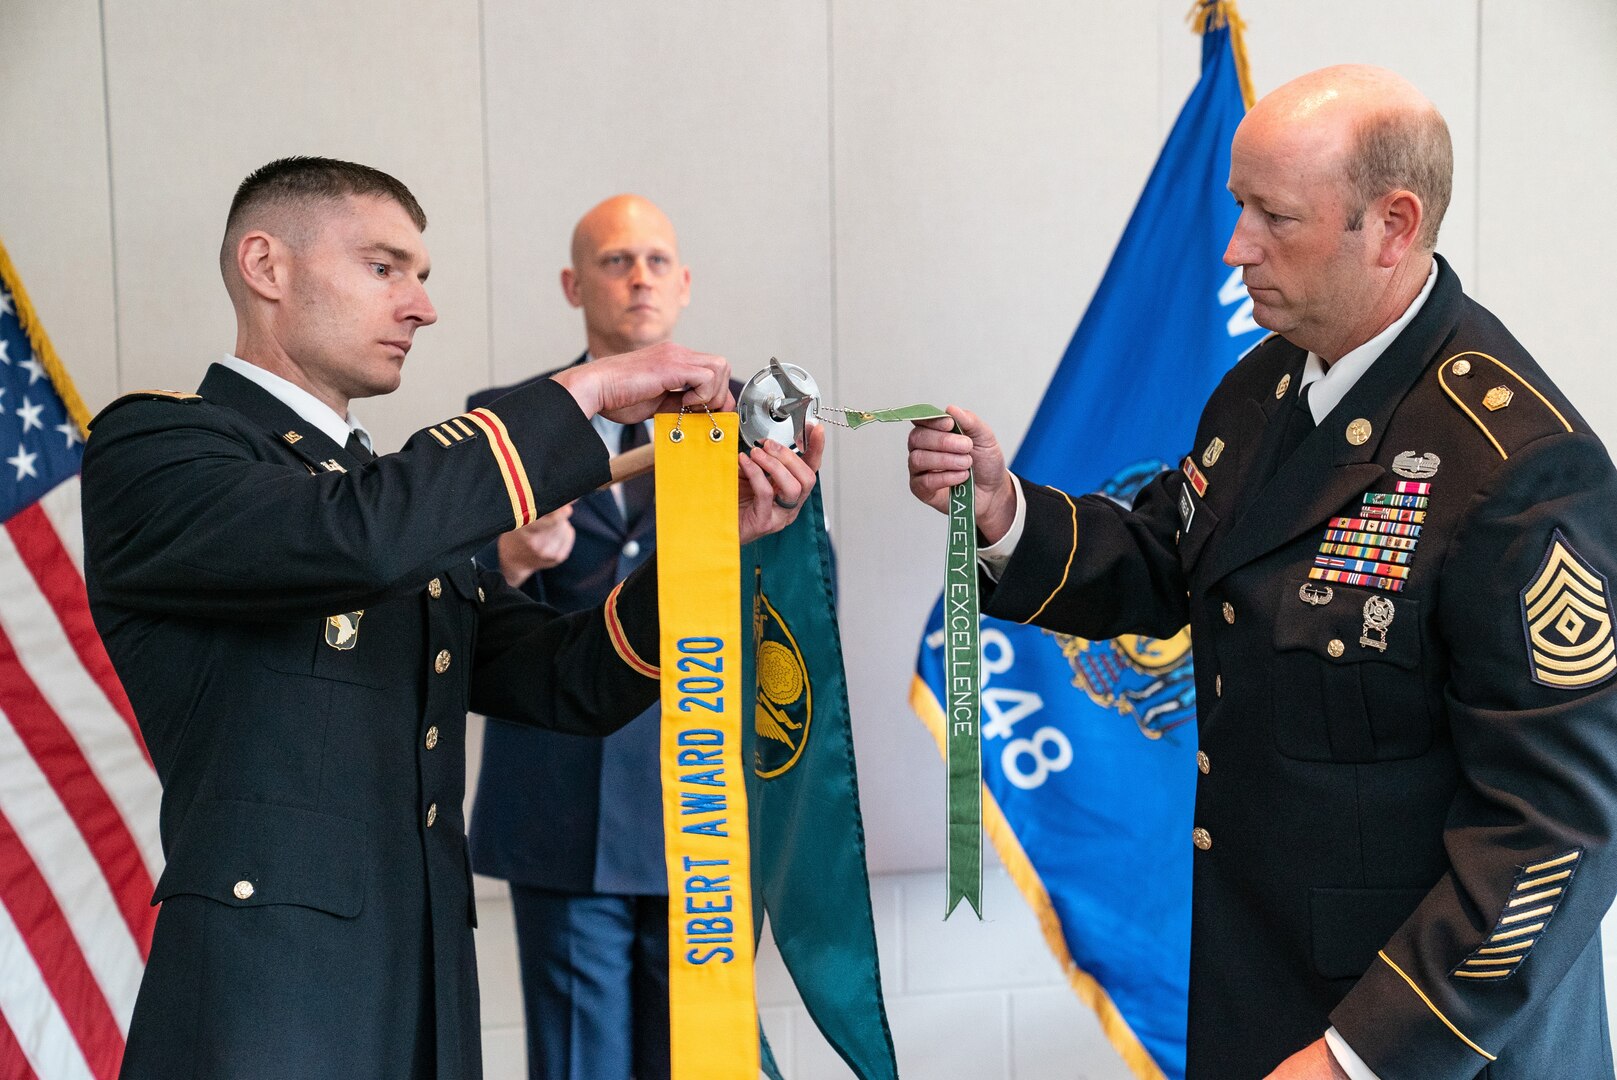 Lt. Col. Joseph Davison, left, and 1st Sgt. Kenneth Prieur, commander and first sergeant of the Wisconsin National Guard's 54th Civil Support Team, attach the 2020 Maj. Gen. William L. Sibert Award streamer to the unit's guidon during a June 23, 2020, virtual U.S. Army Chemical Corps ceremony. The U.S. Army Chemical Biological Radiological and Nuclear (CBRN) School annually presents the Sibert Award to the top CBRN units in the active component, Army Reserve, and Army National Guard.